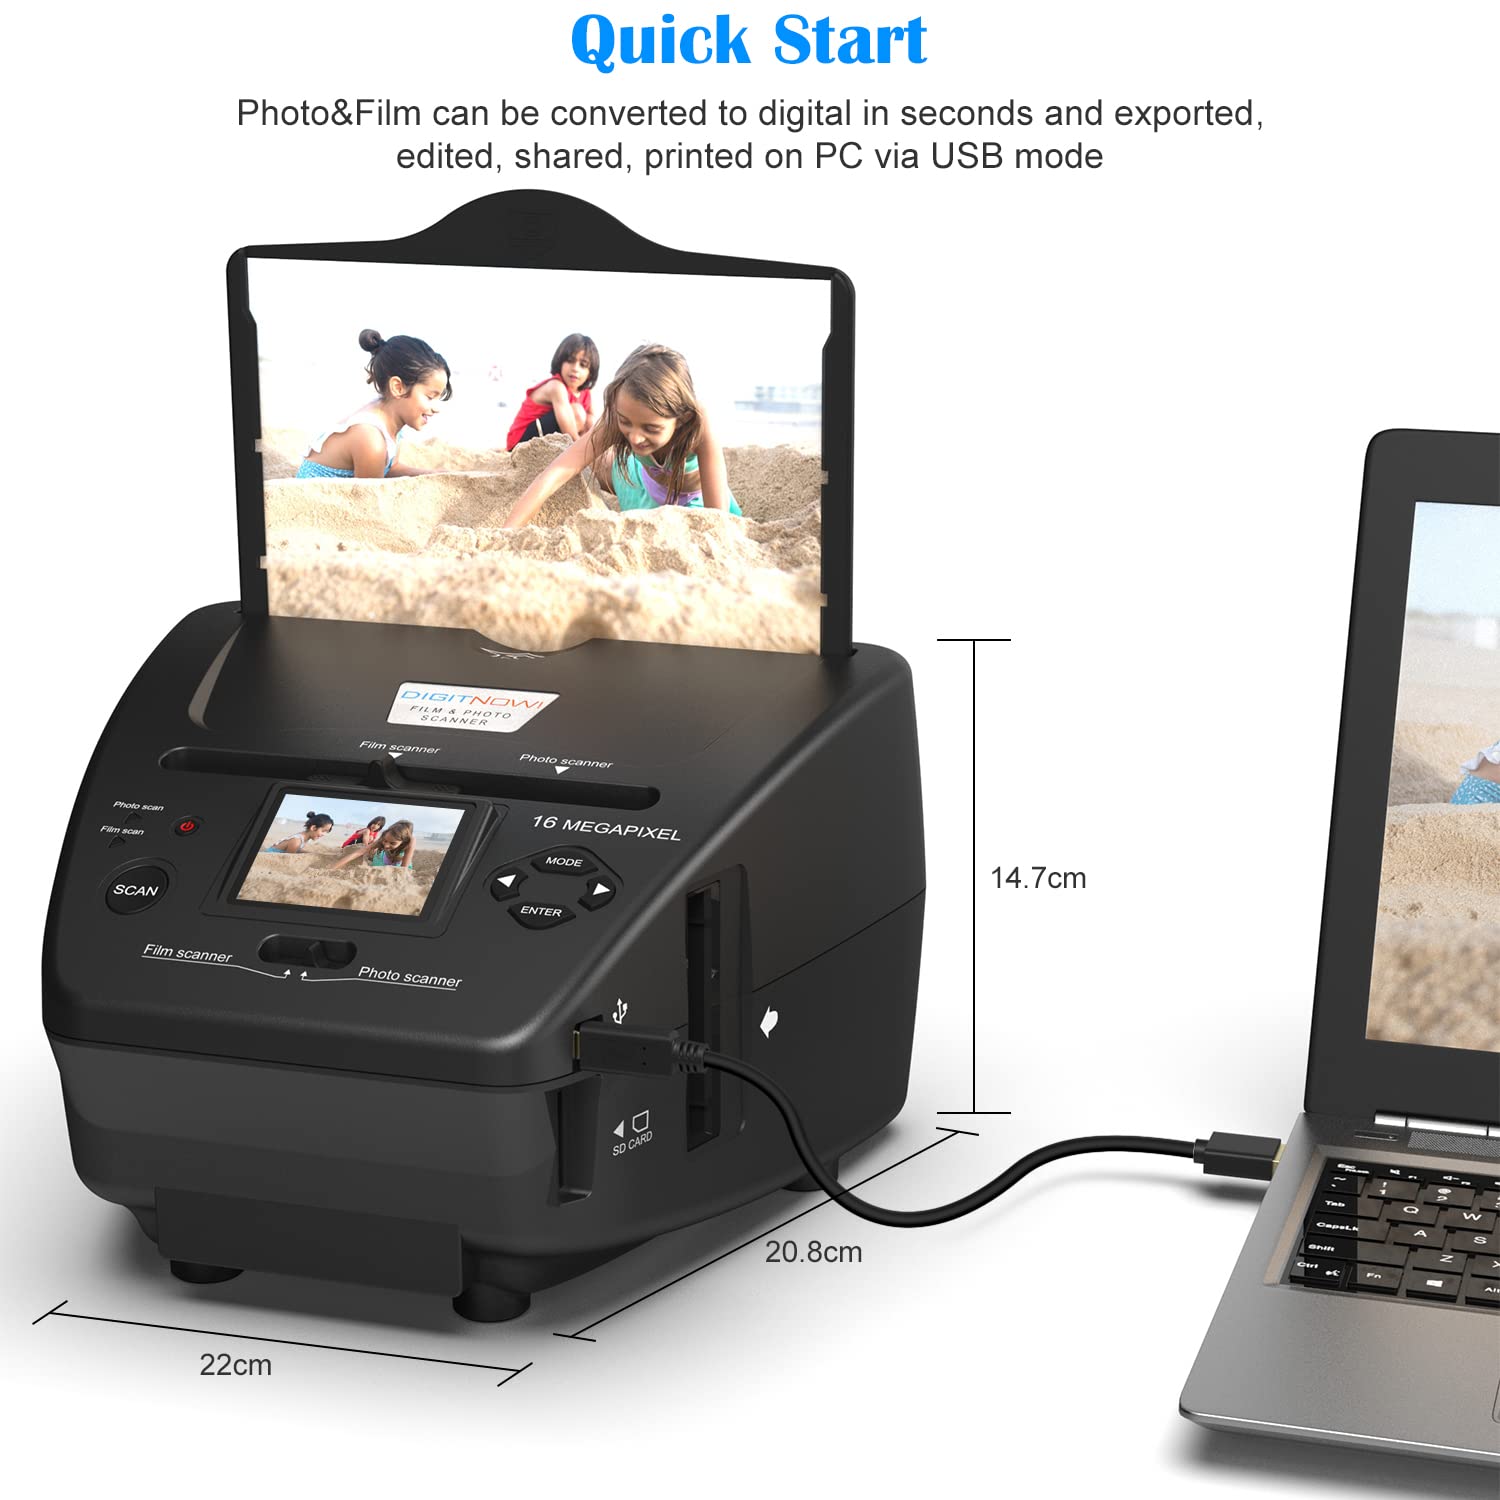 Ion's “Film 2 SD” Negative Scanner Digitizes Old Snaps In A Snap